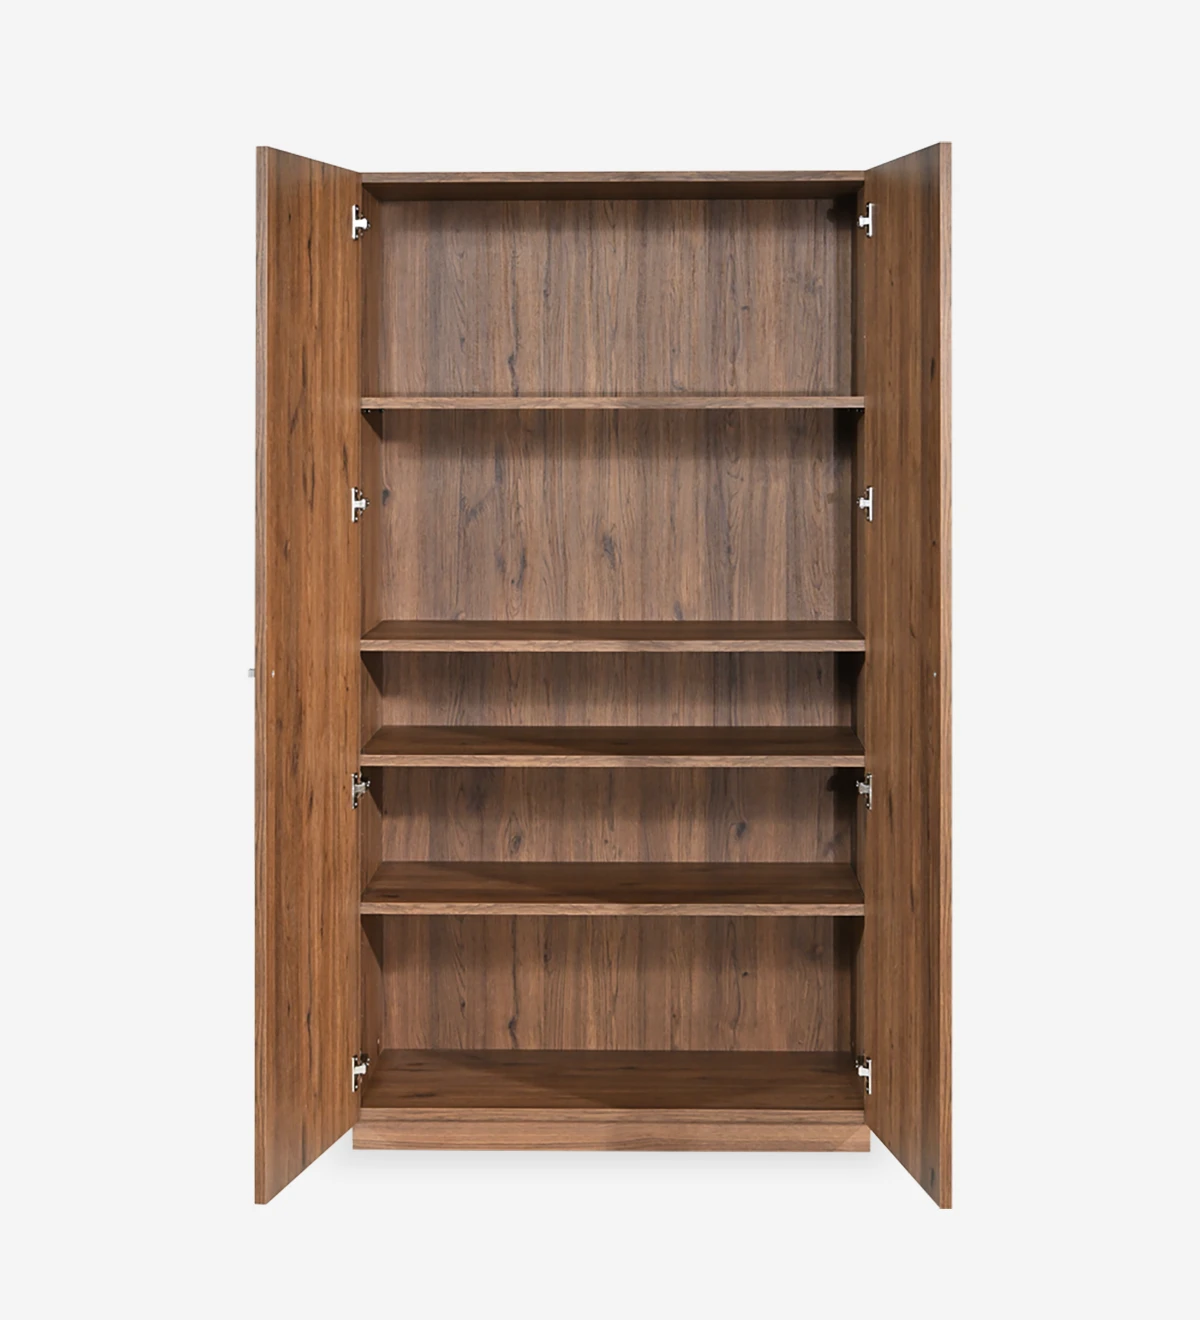 Low bookcase in aged oak, with 2 doors and removable shelves.